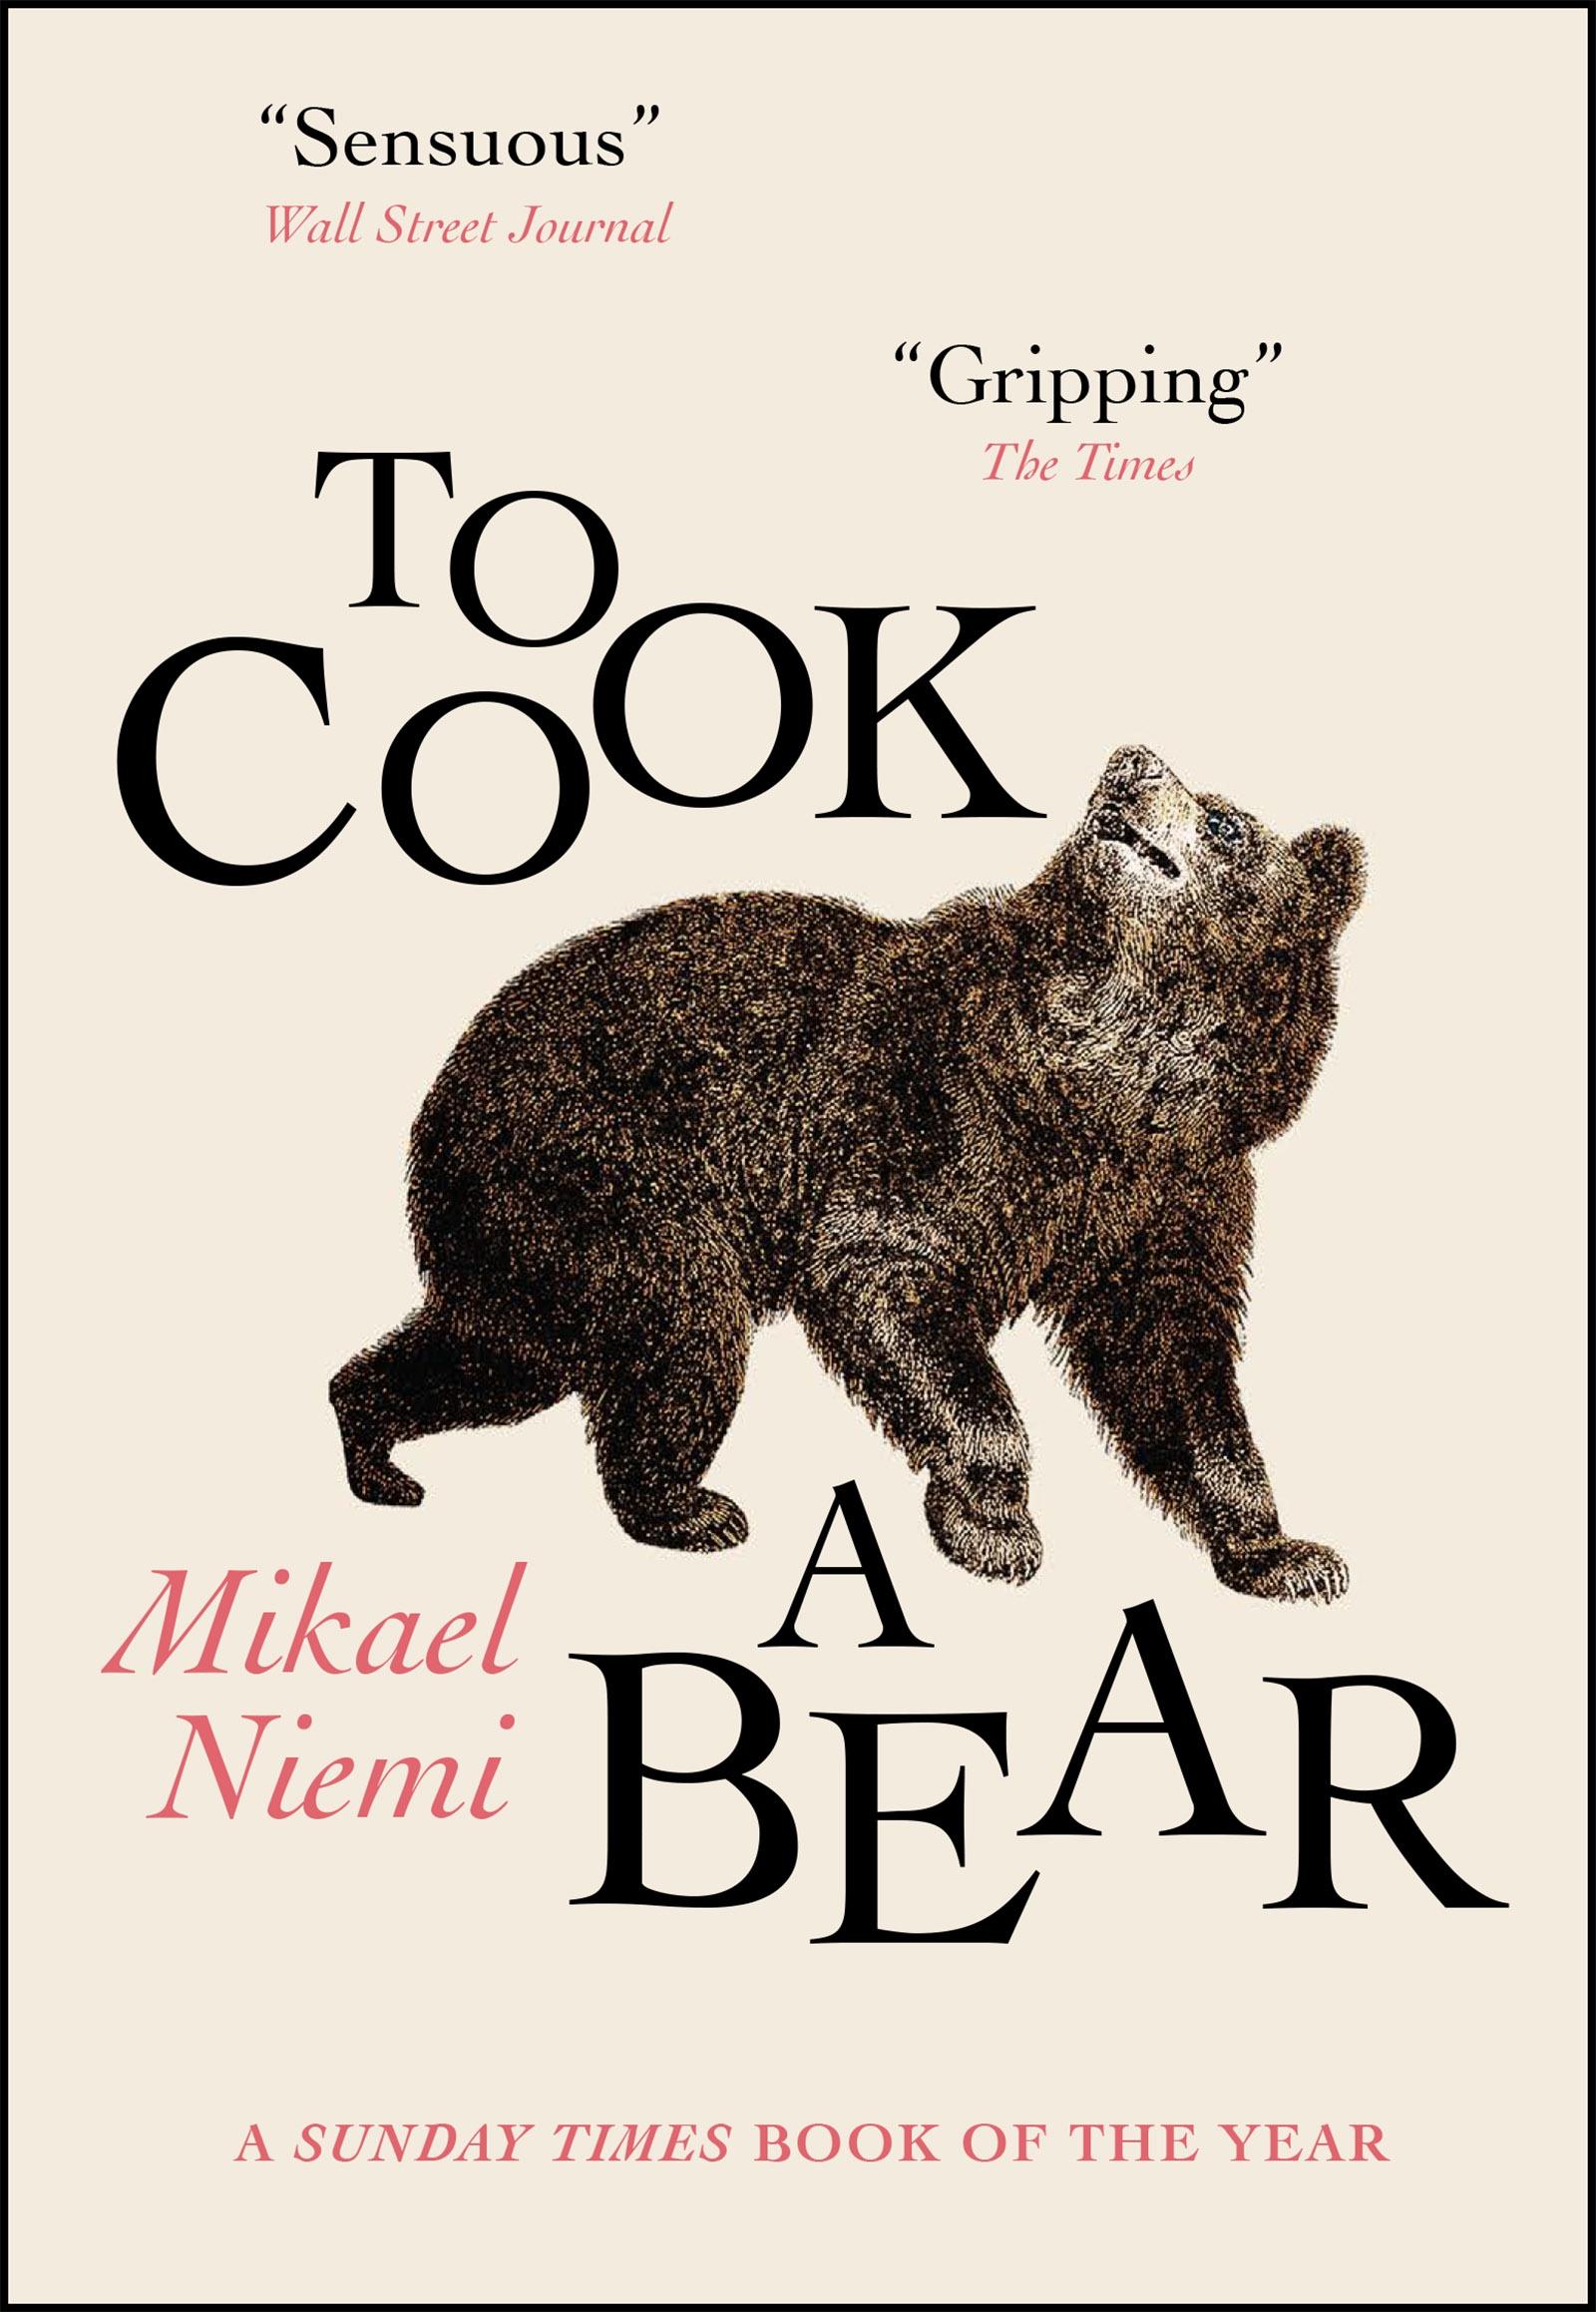 A cover of the book To cook a bear: a light background with an illustration of a brown bear and text on.